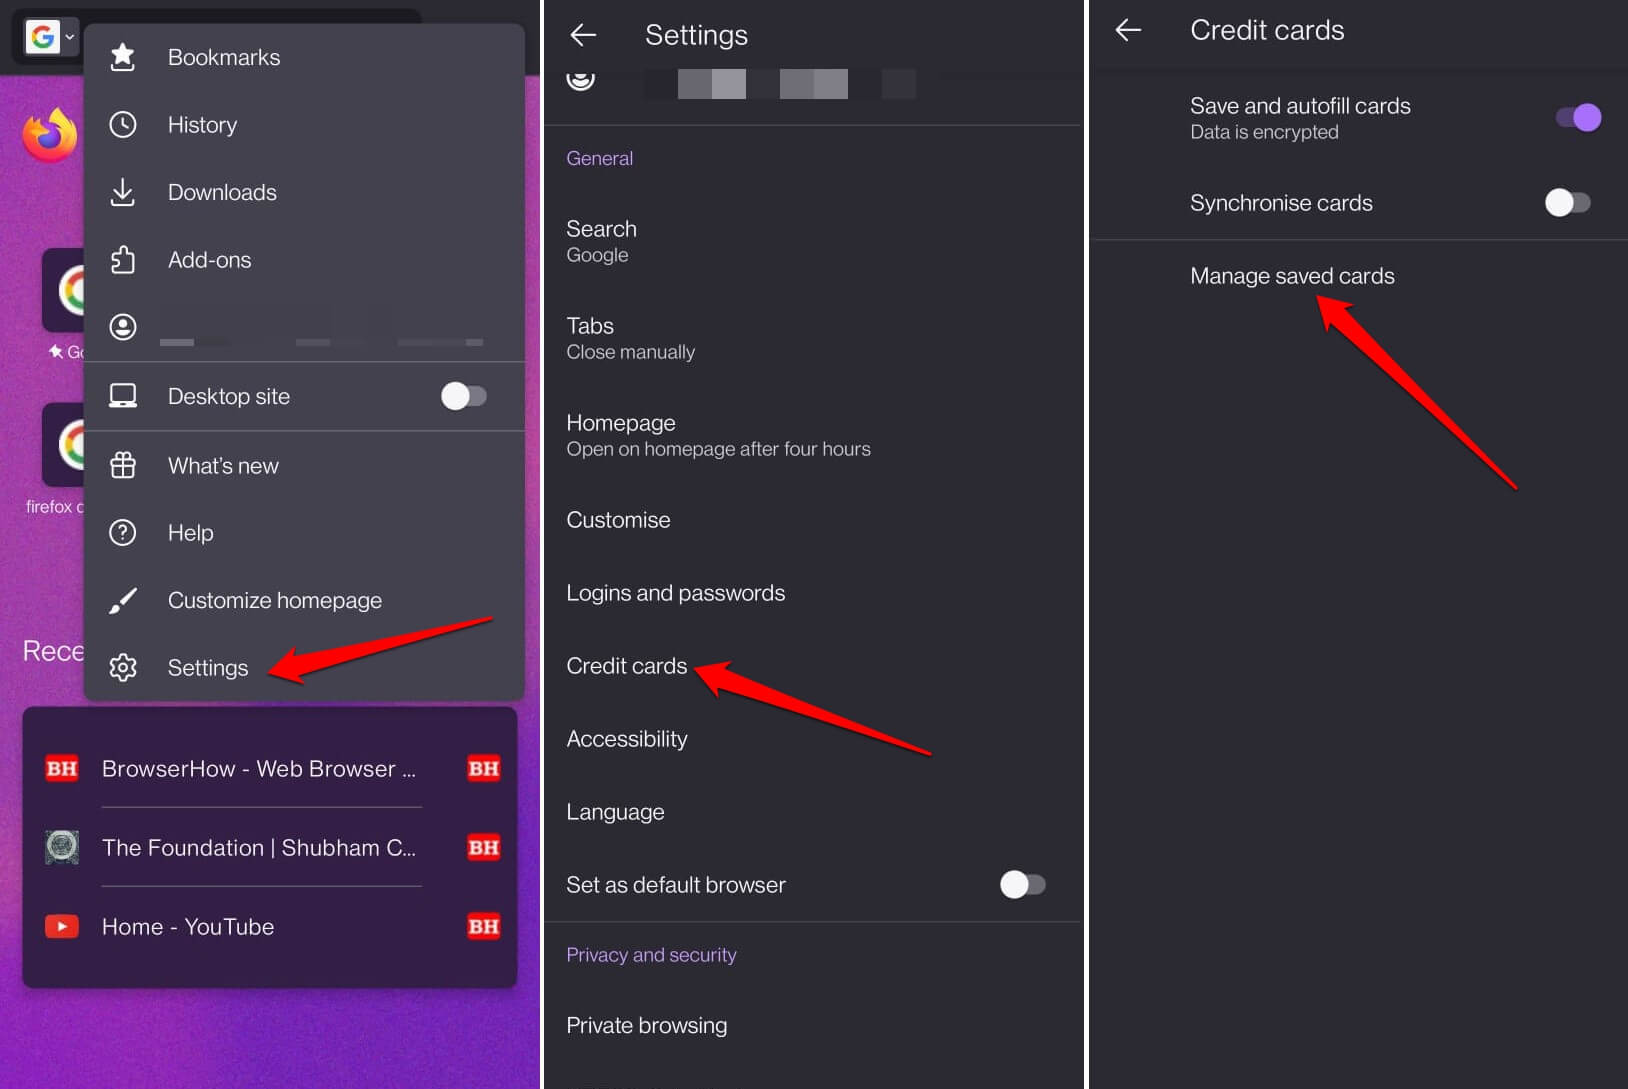 manage saved cards on Firefox android